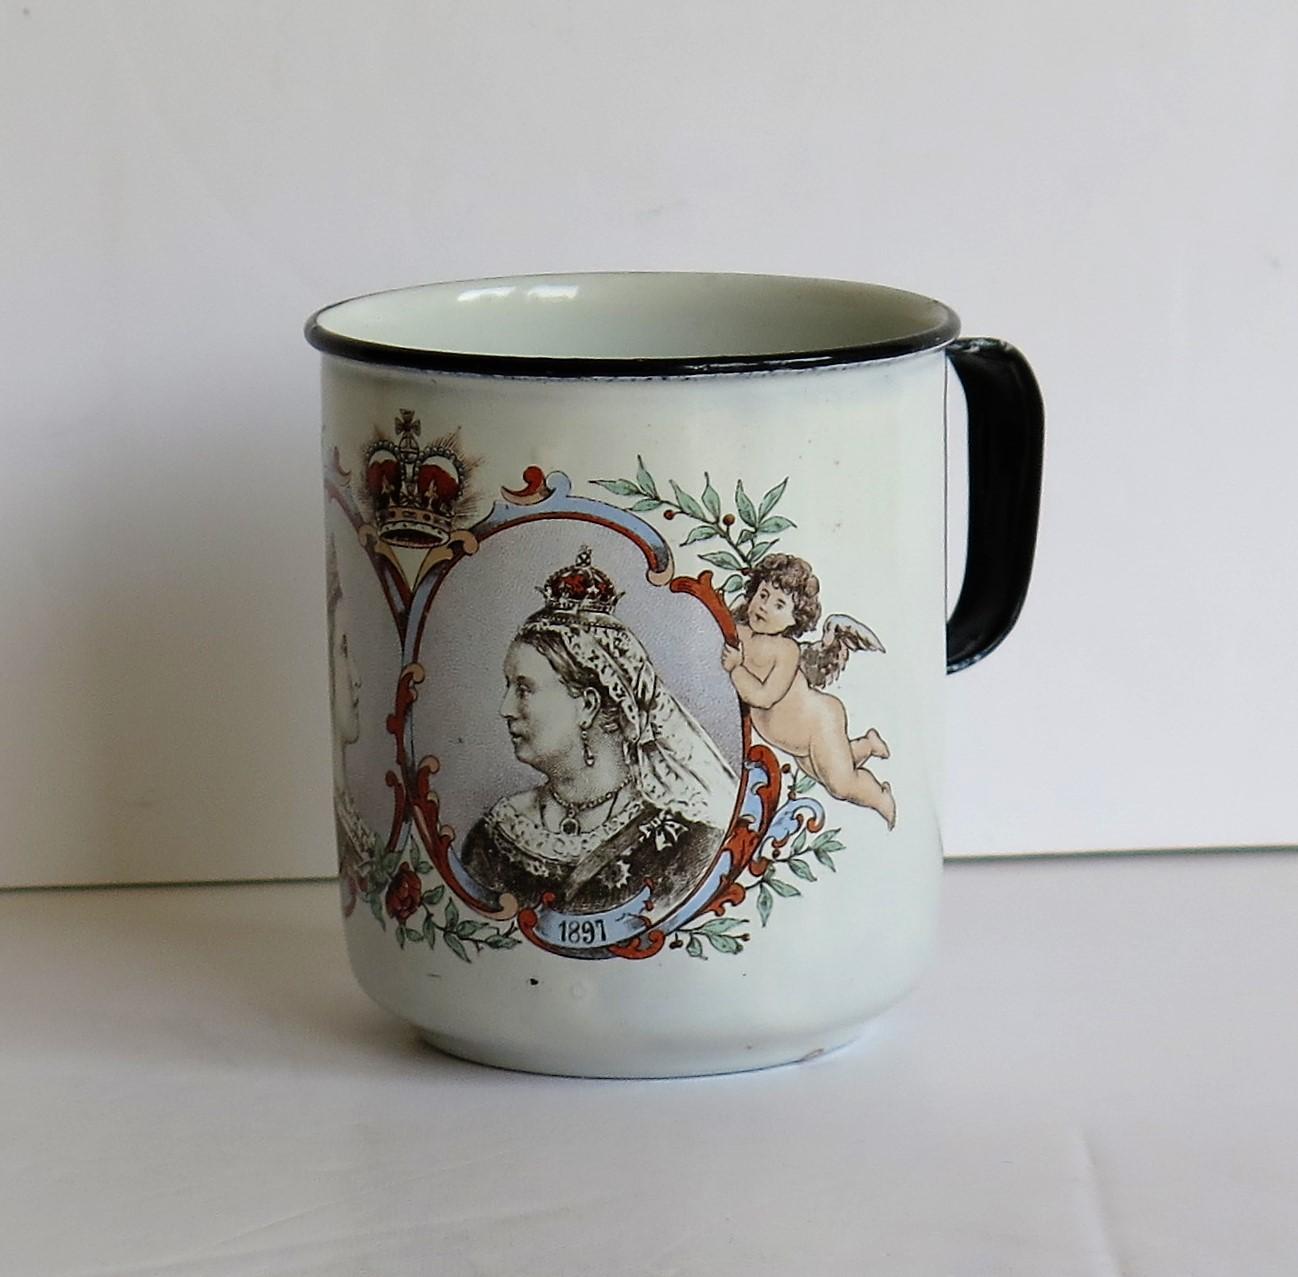 This is a good late 19th century enamelled tin mug or cup made in 1897 to commemorate the Diamond Jubilee of Queen Victoria.

The piece is made in the shape of a coffee can or mug with a loop handle.

It has been decorated with a coloured